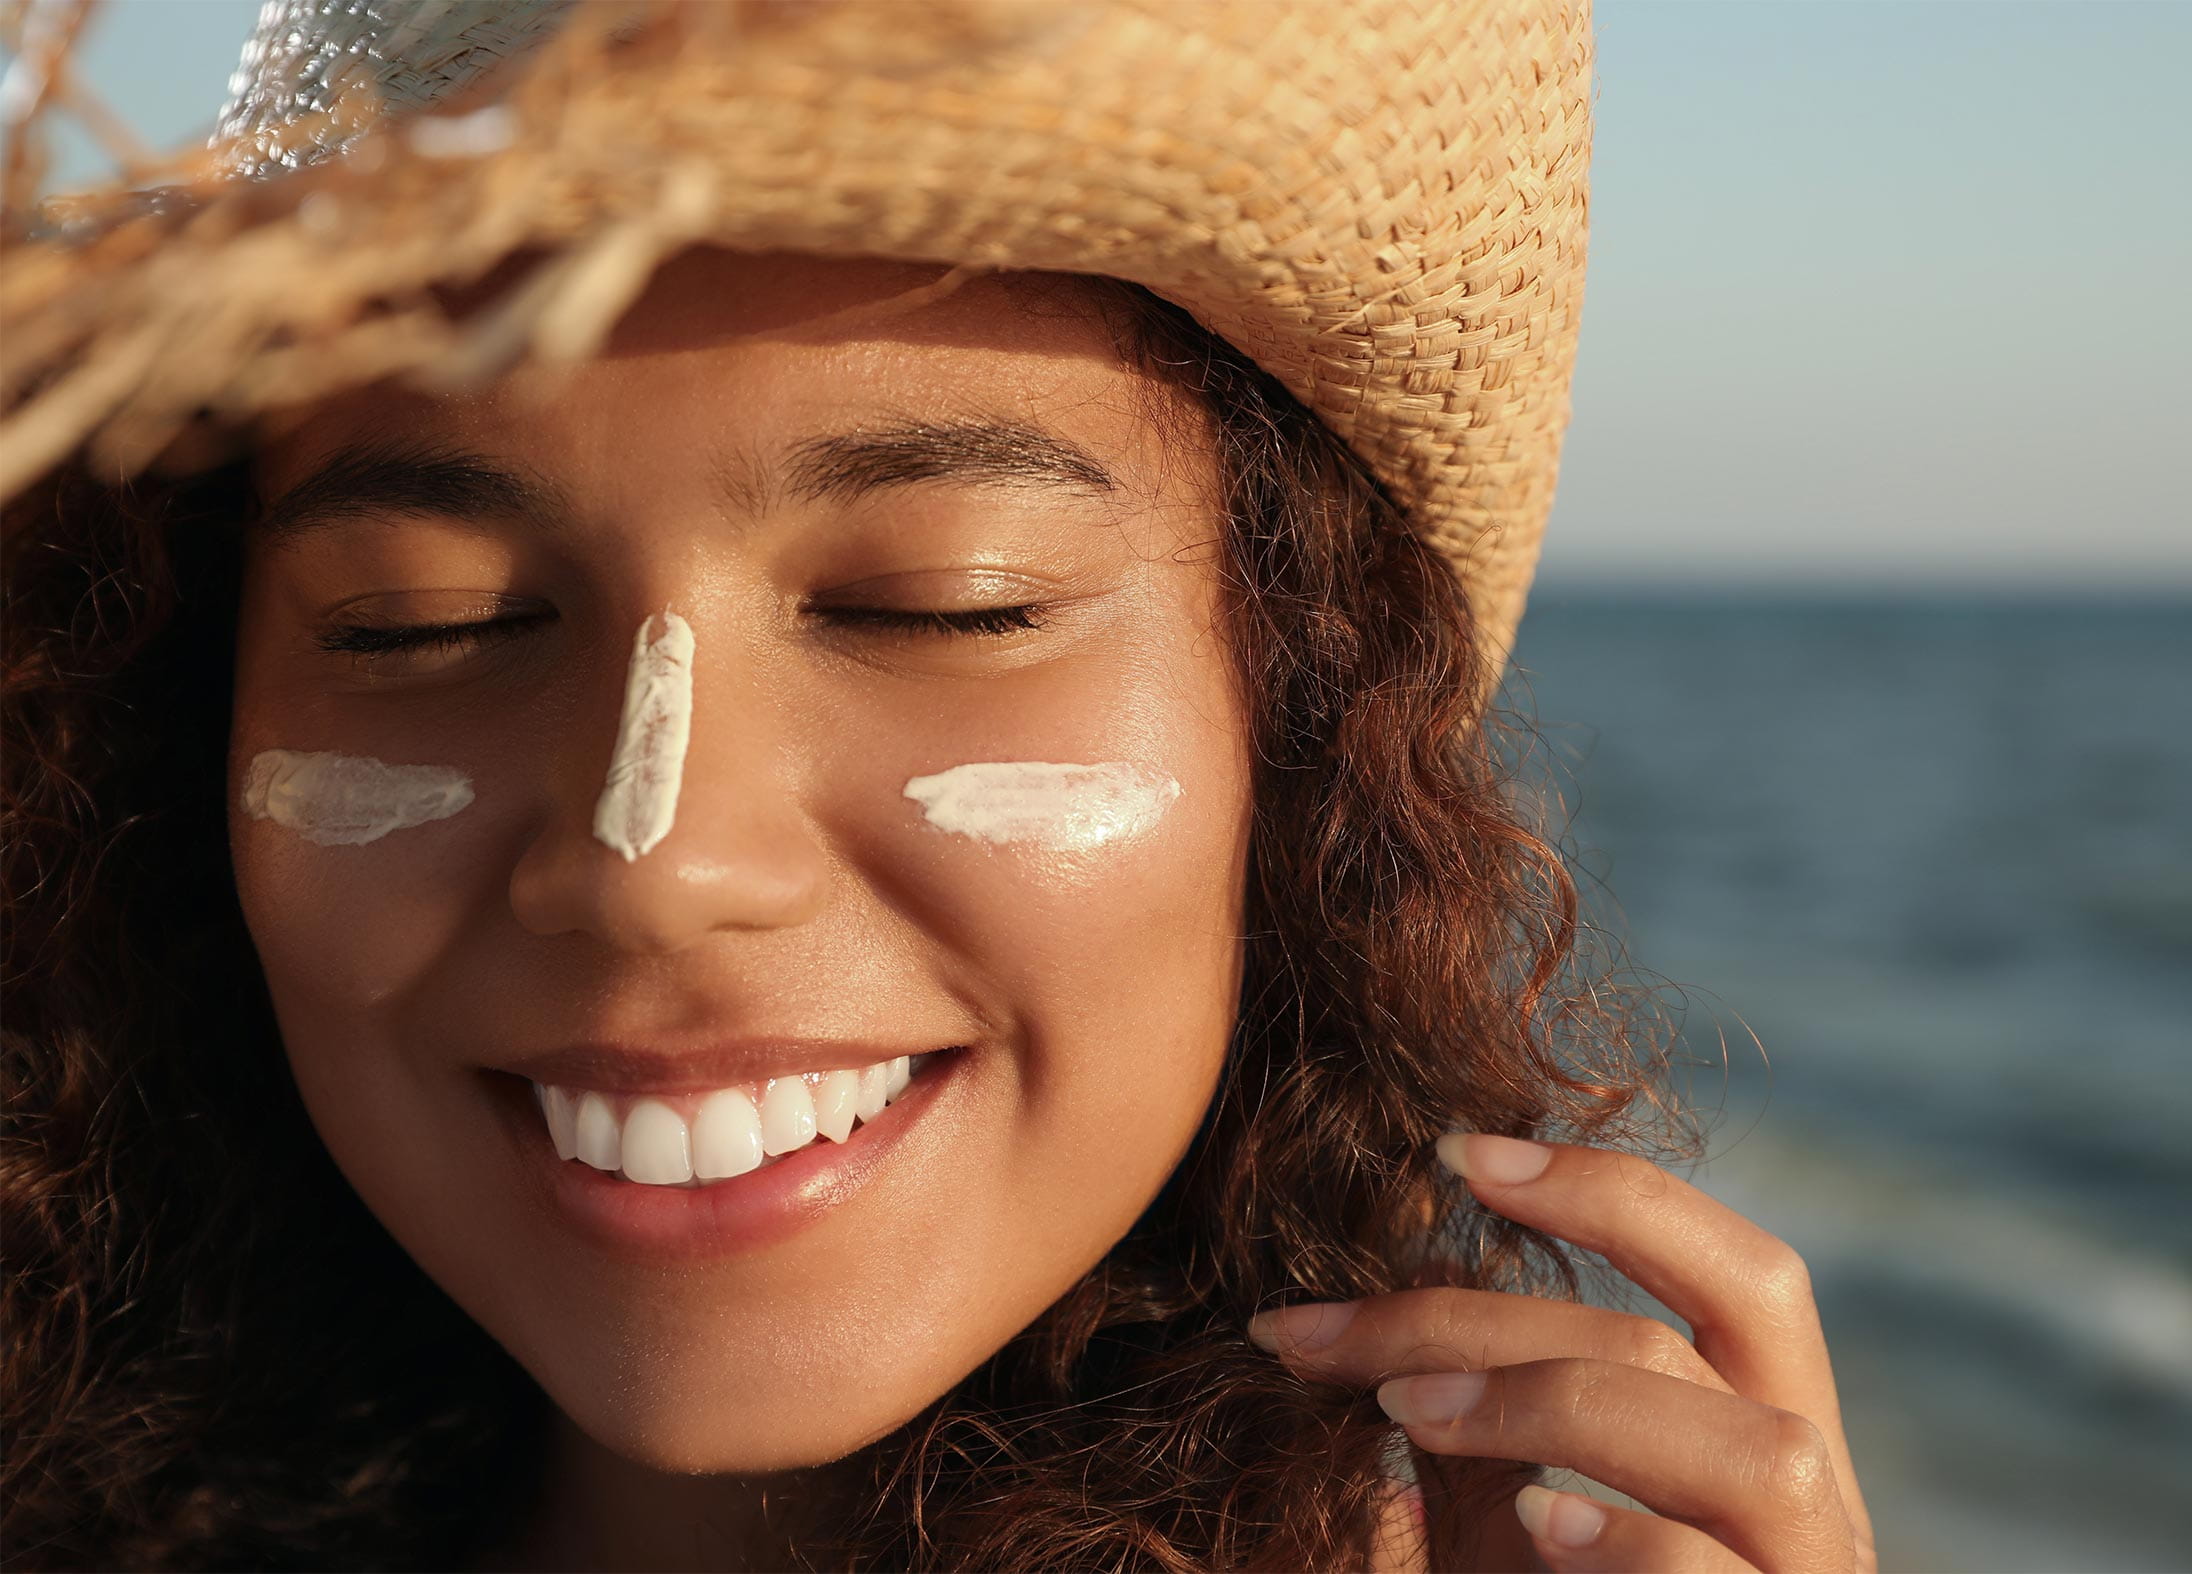 A woman smiling at the beach wearing sunscreen